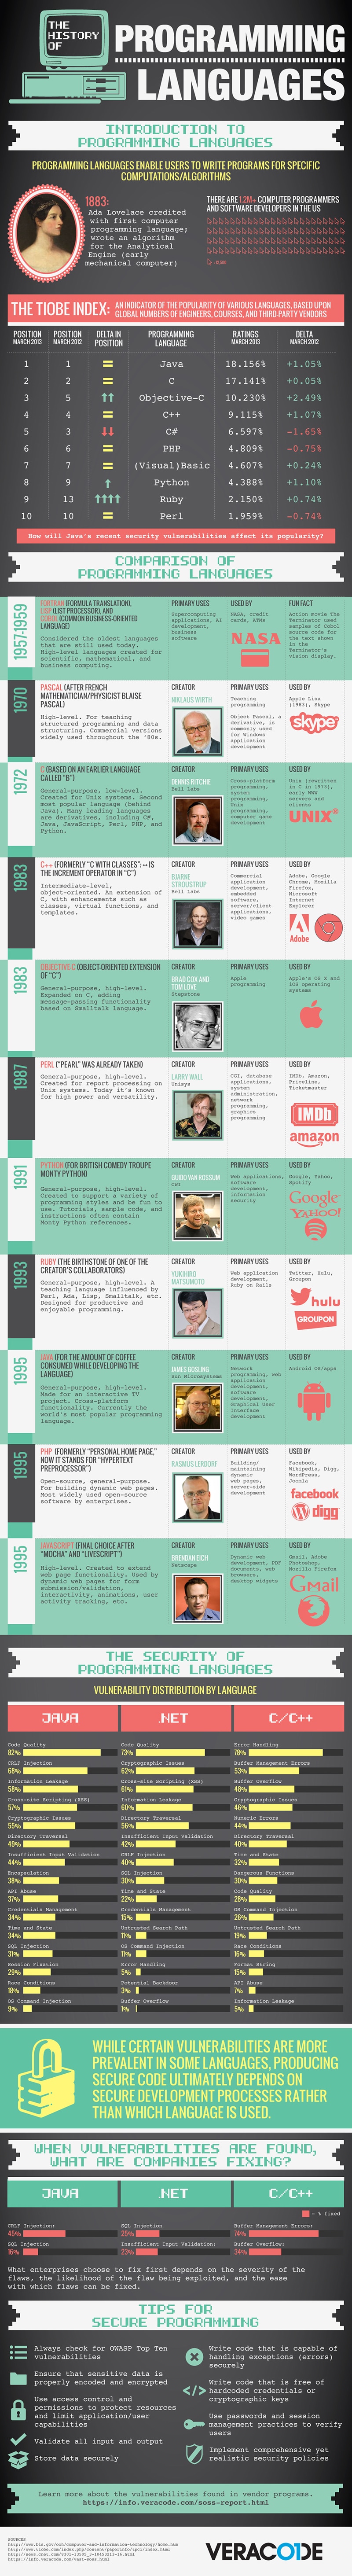 The History Of Programming Languages [Infographic]